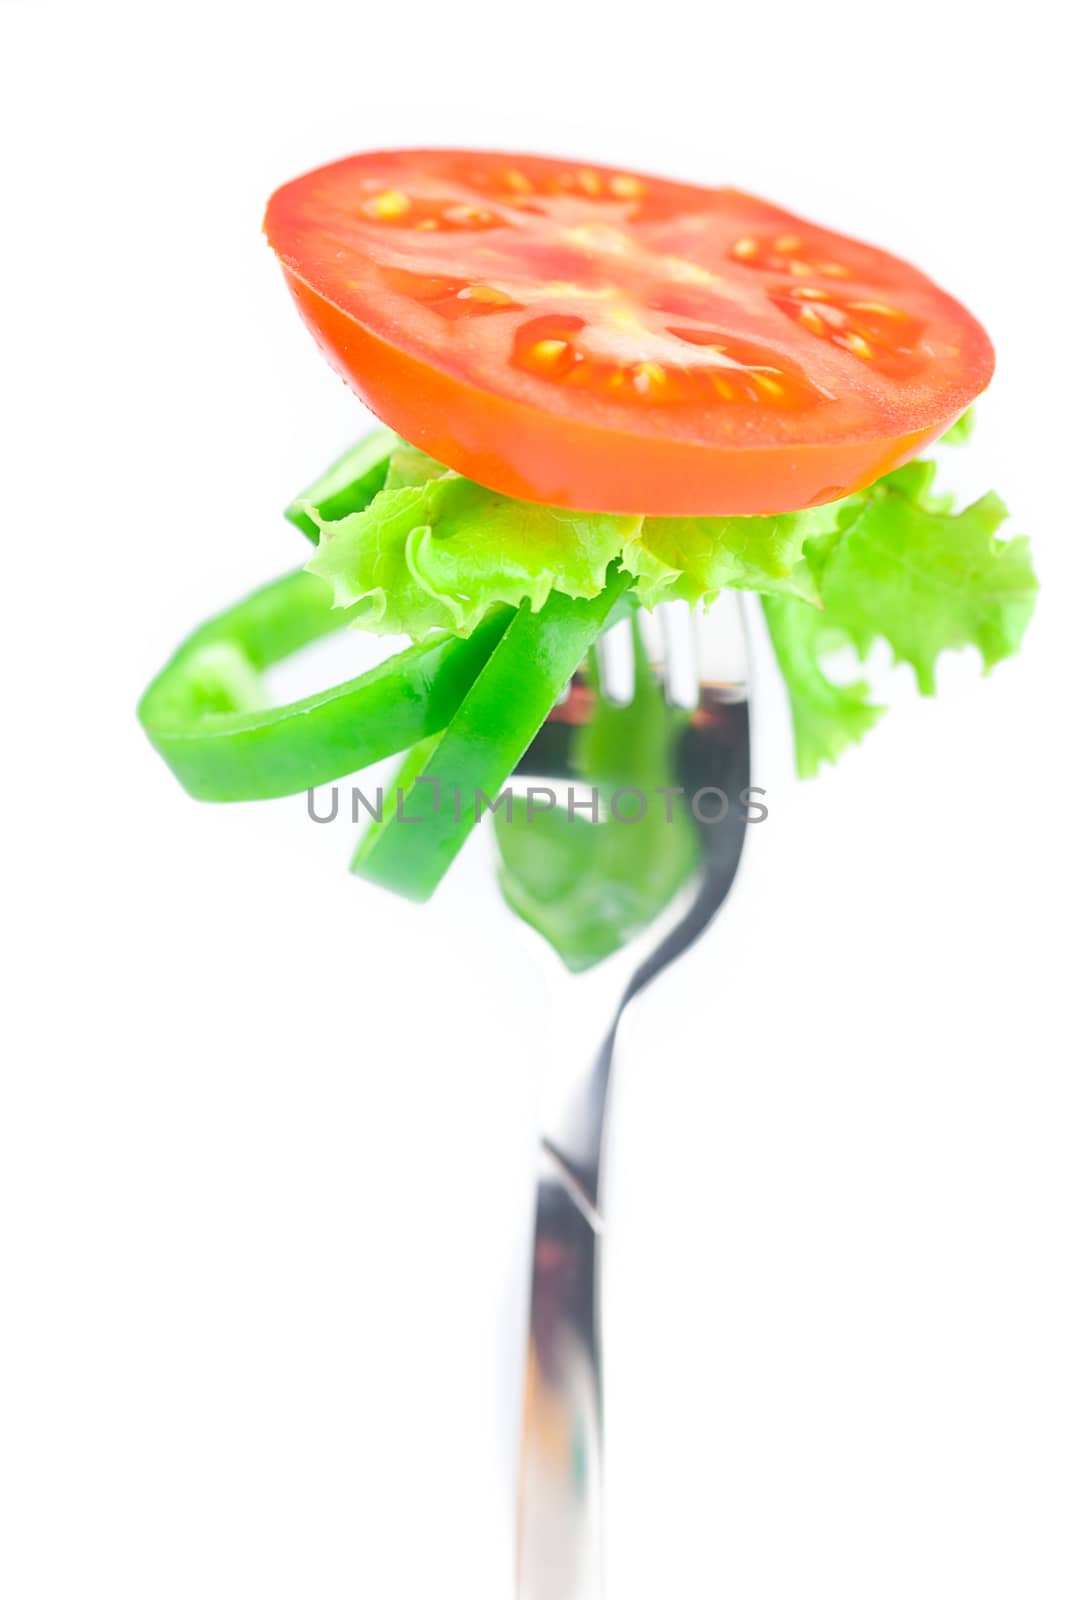 tomato ,lettuce,fork ,cucumber and pepper isolated on white